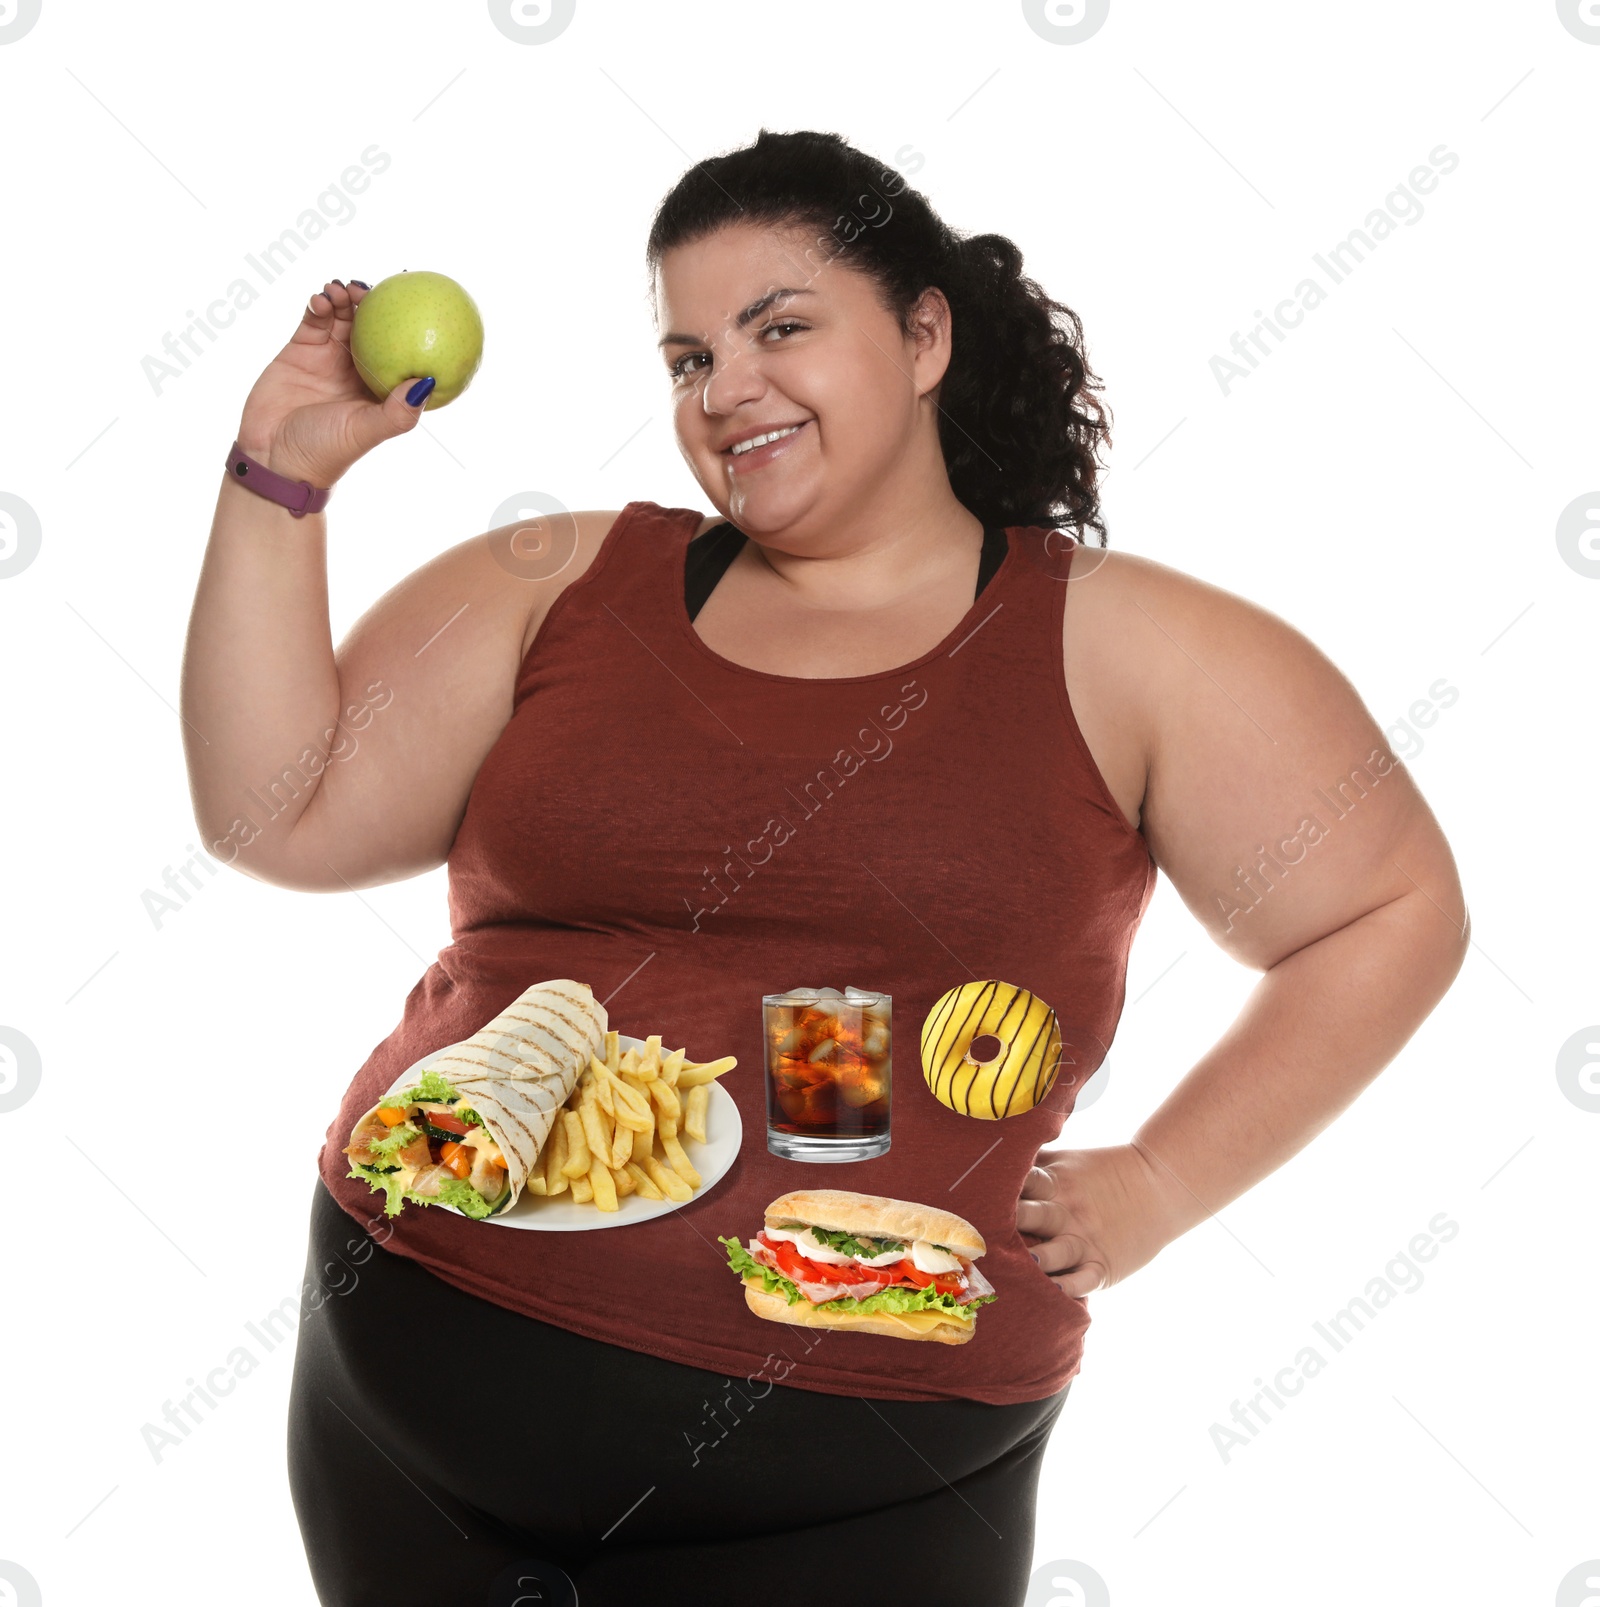 Image of Happy overweight woman with apple and images of different unhealthy food on her belly against white background